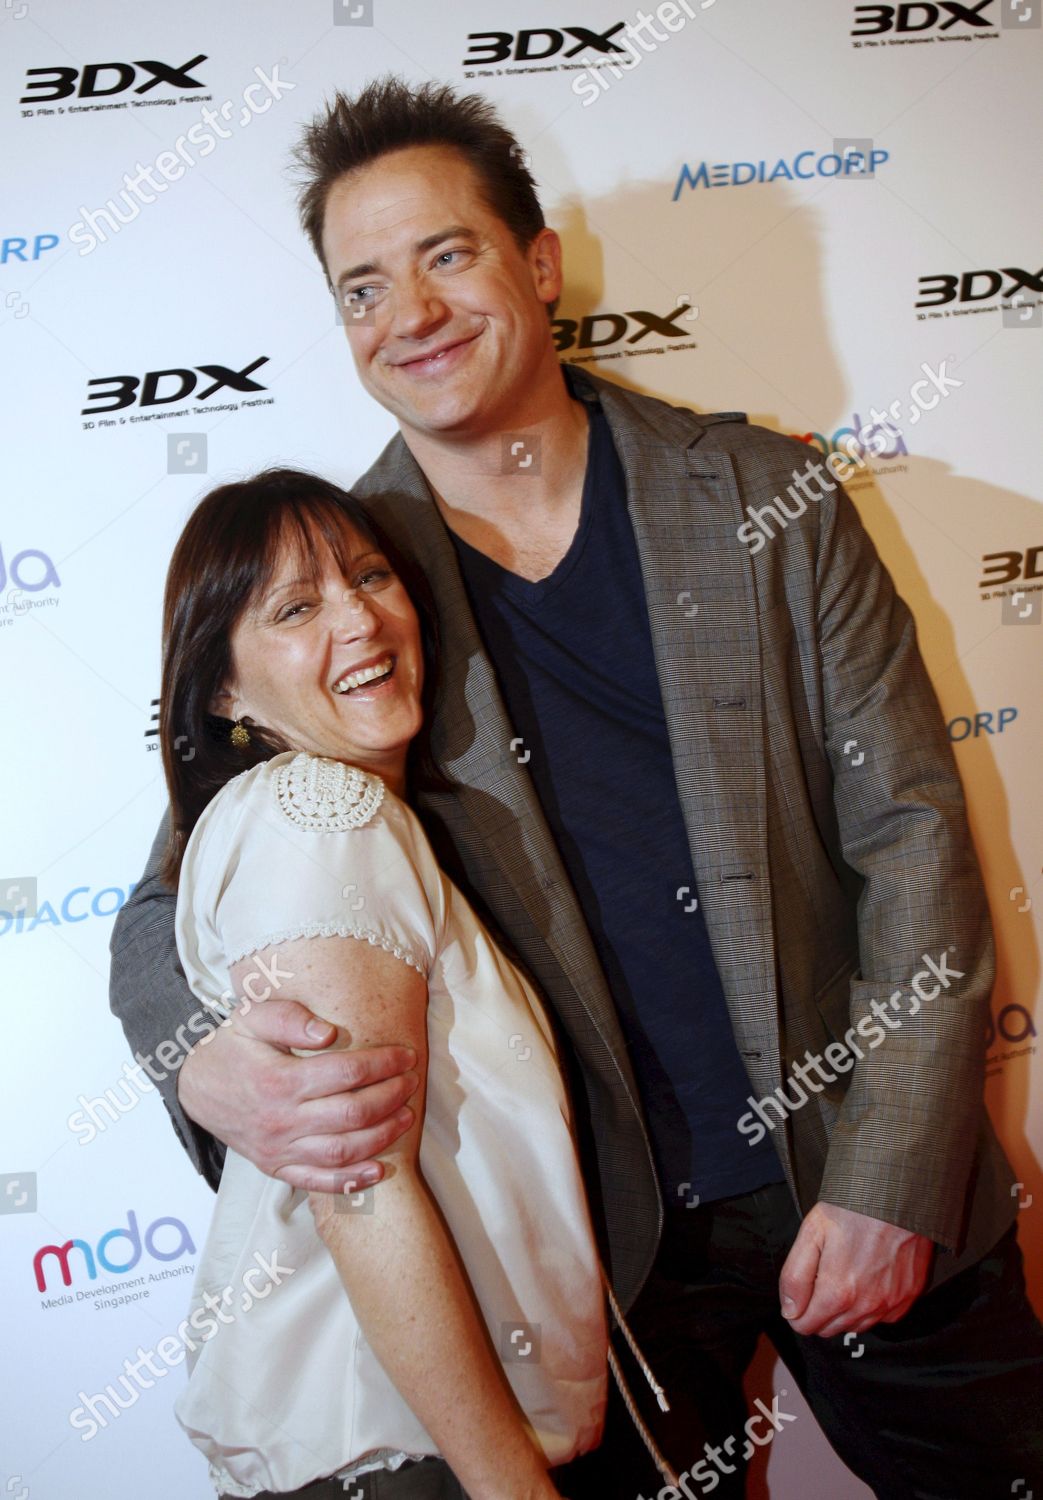 Canadianamerican Actor Brendan Fraser R Poses Producer Editorial Stock Photo Stock Image Shutterstock